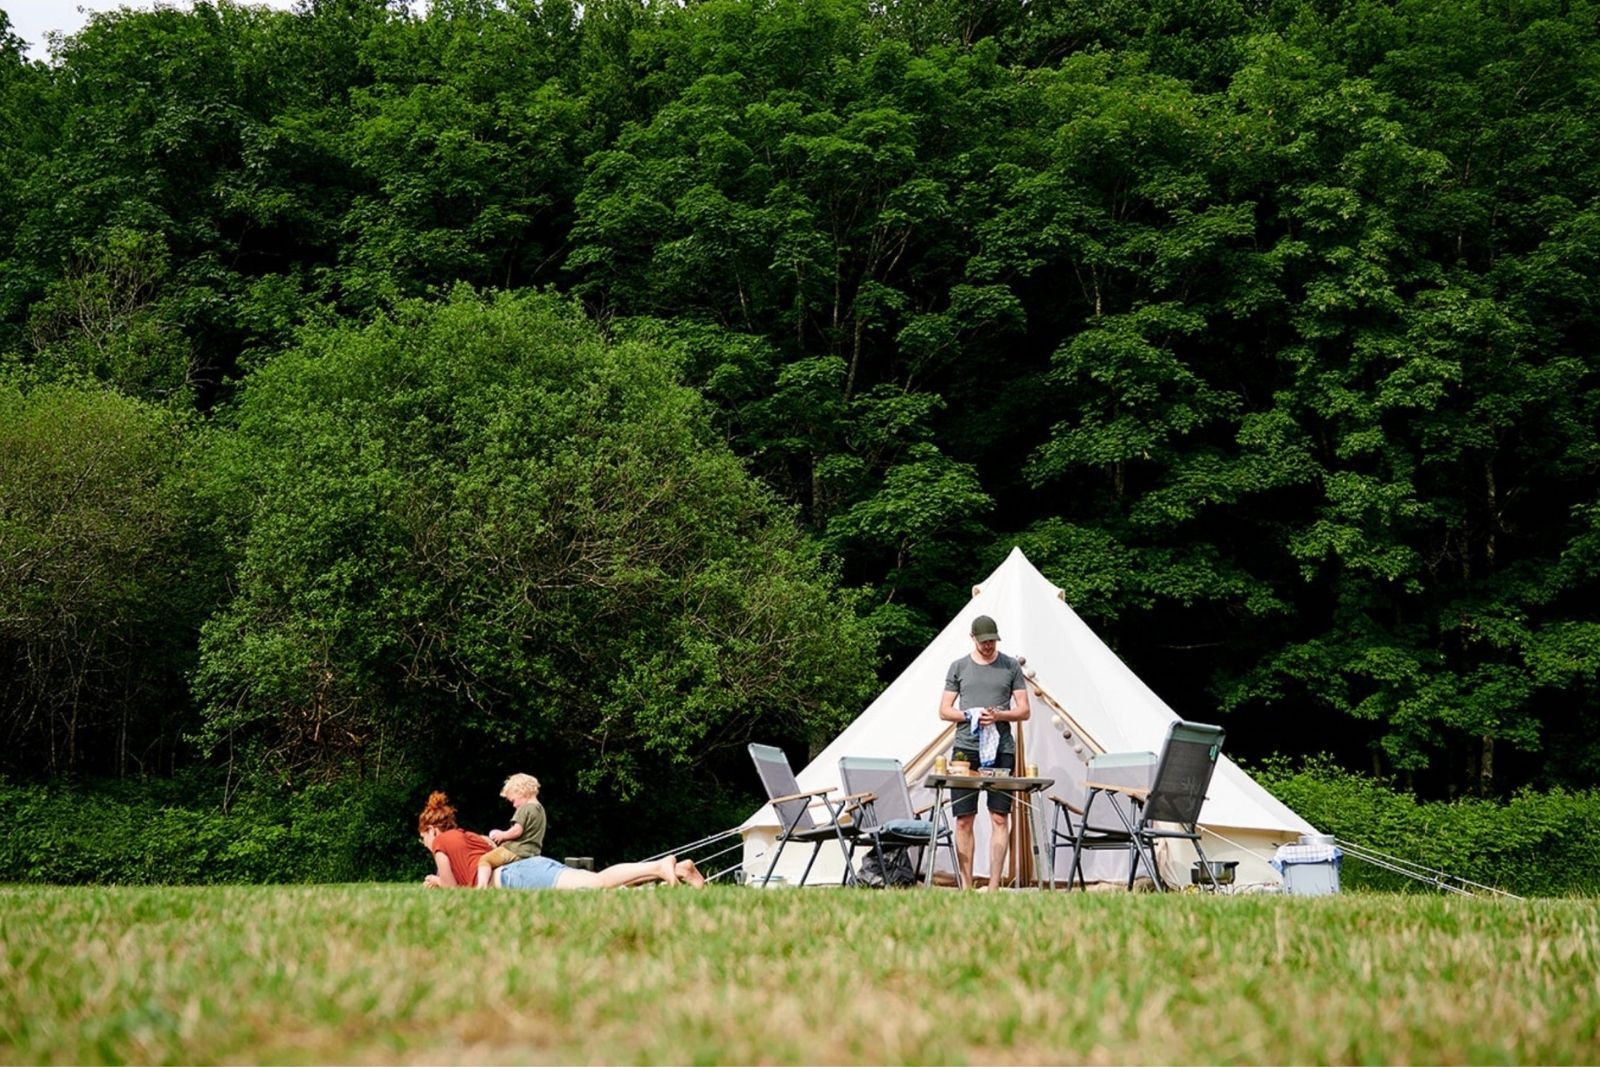 Supertrips - Tipi tent overnachting in de Ardennen